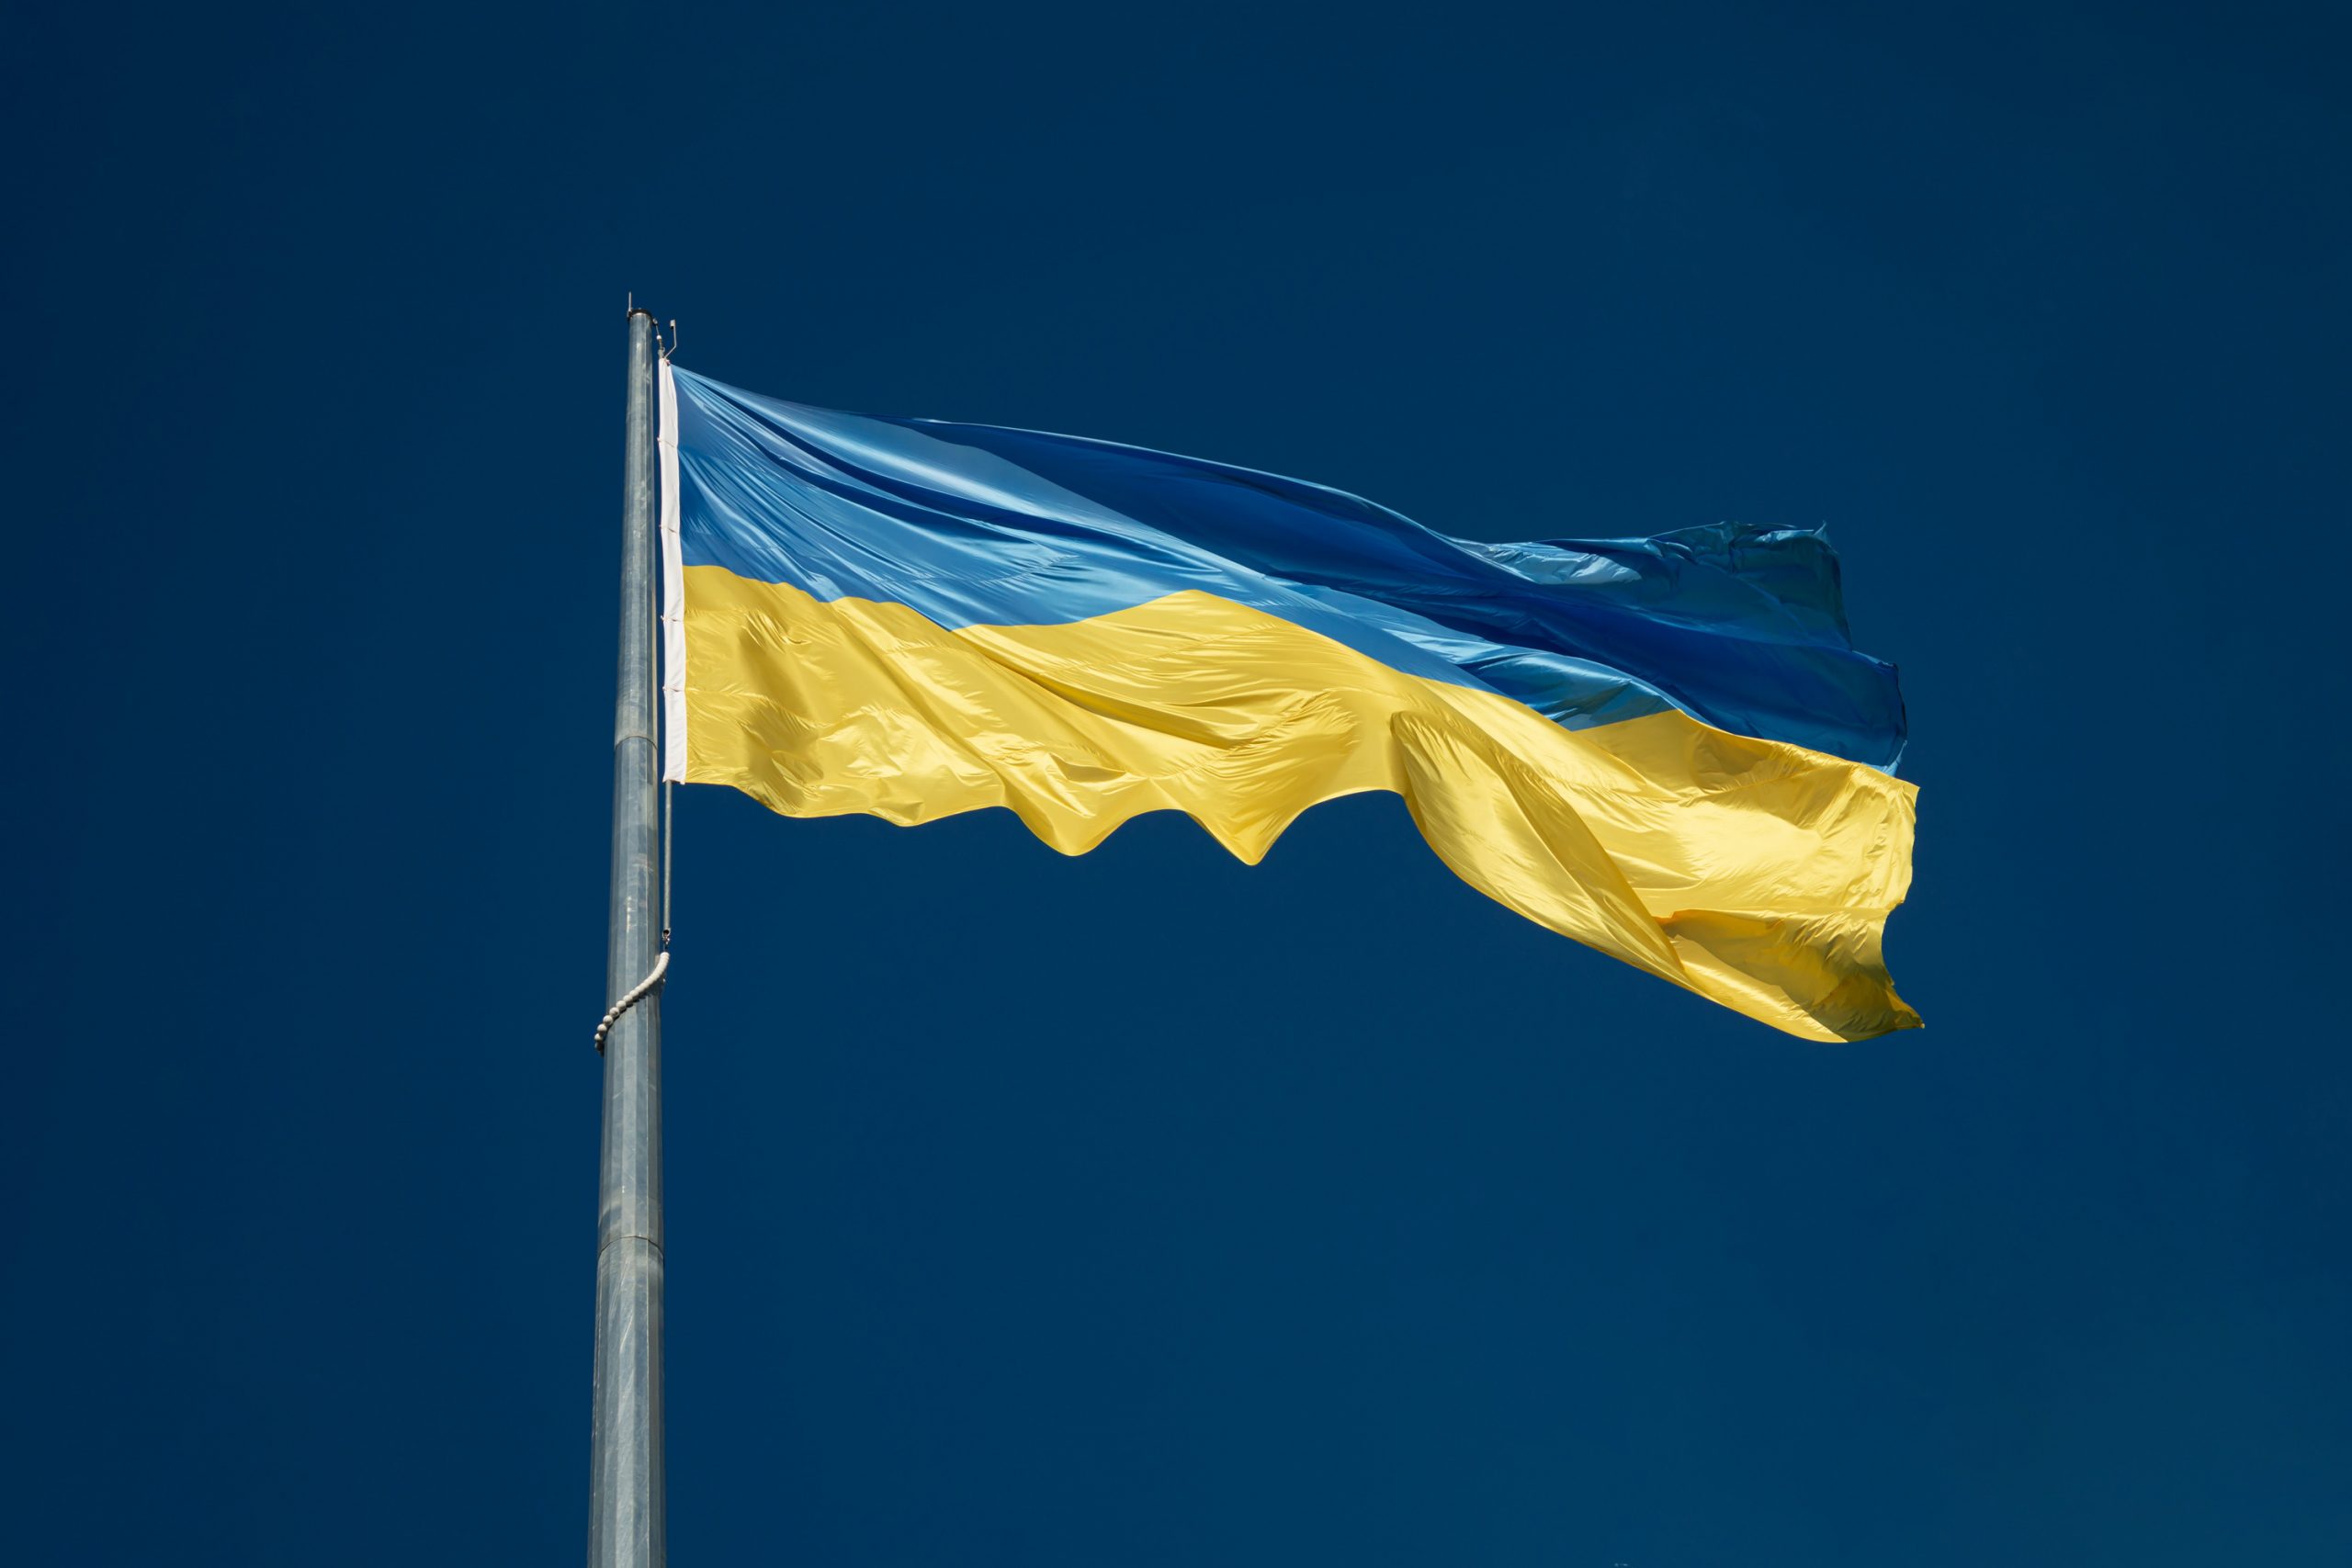 Ukraine flag blowing in wind against a deep blue clear sky backdrop. Image by Yehor Milohrodskyi.